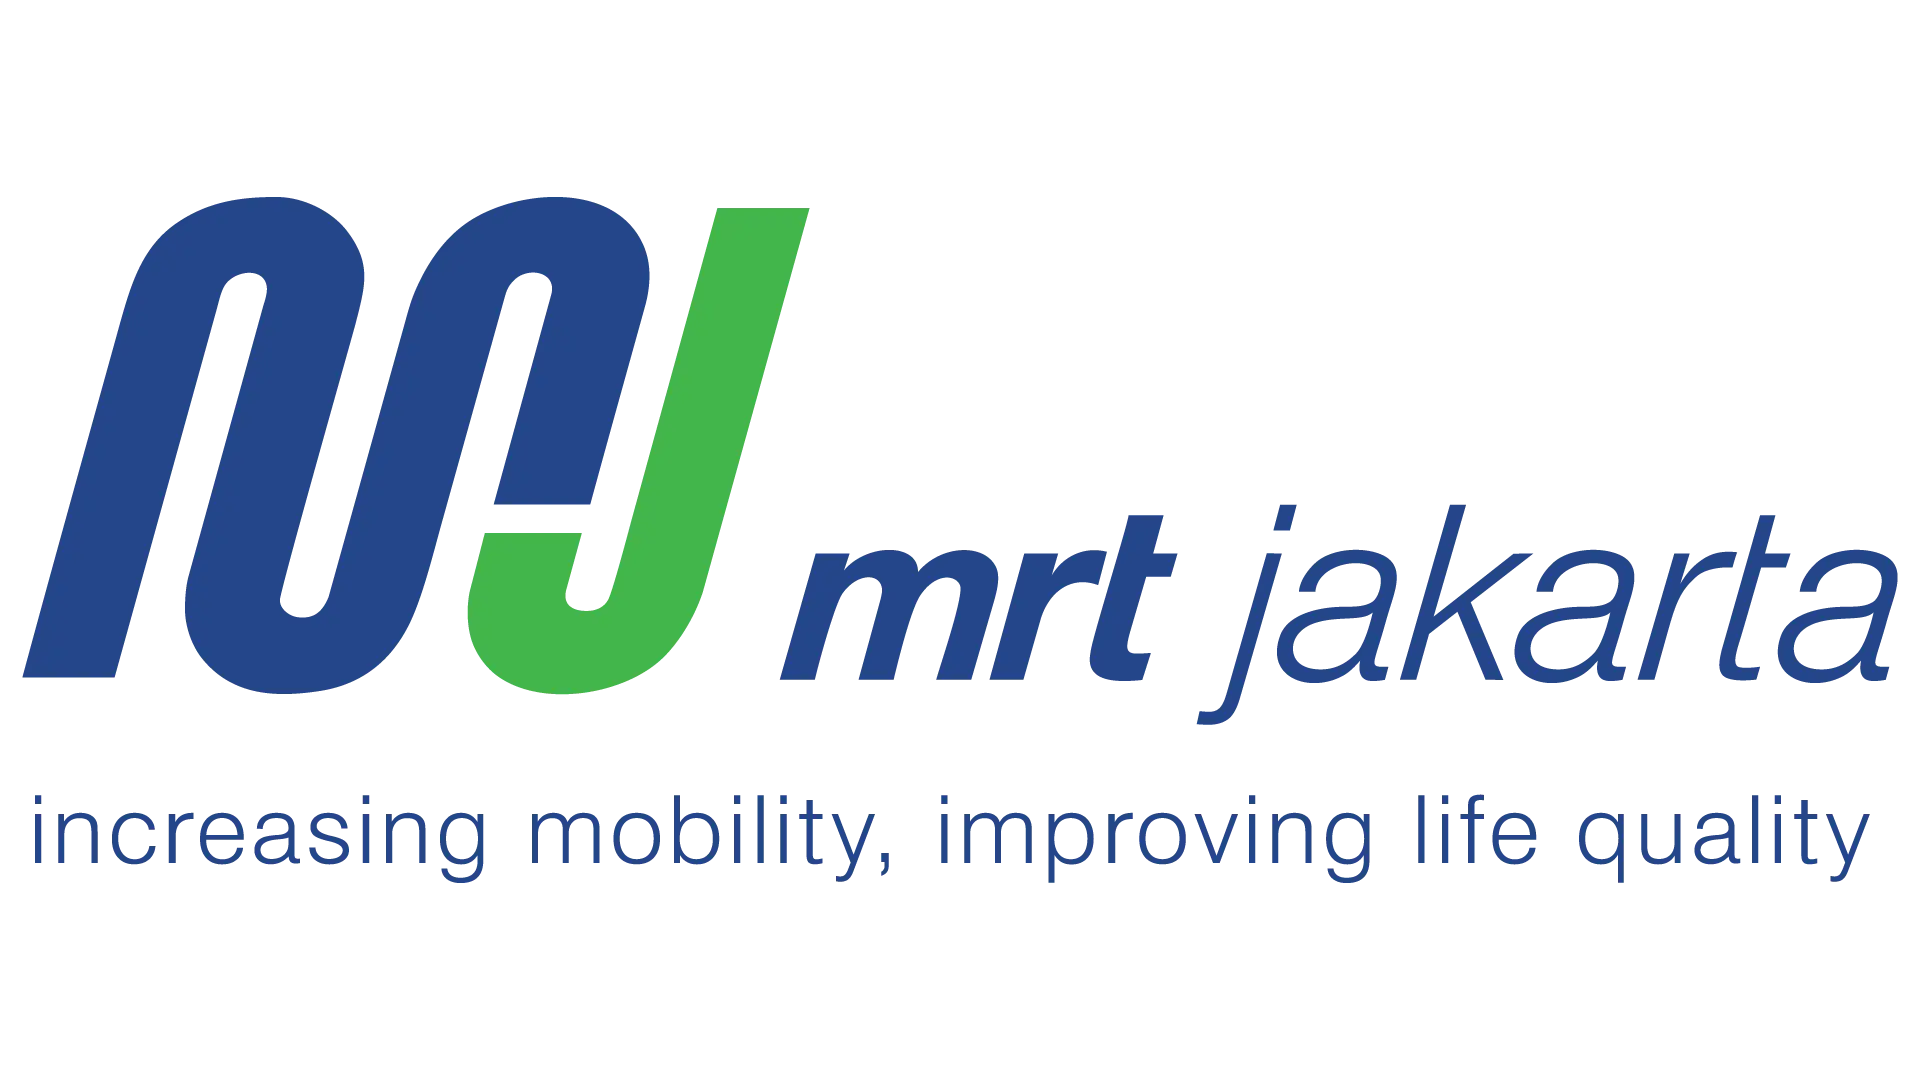 Chatbot manager in the public transportation industry owned by MRT Jakarta company